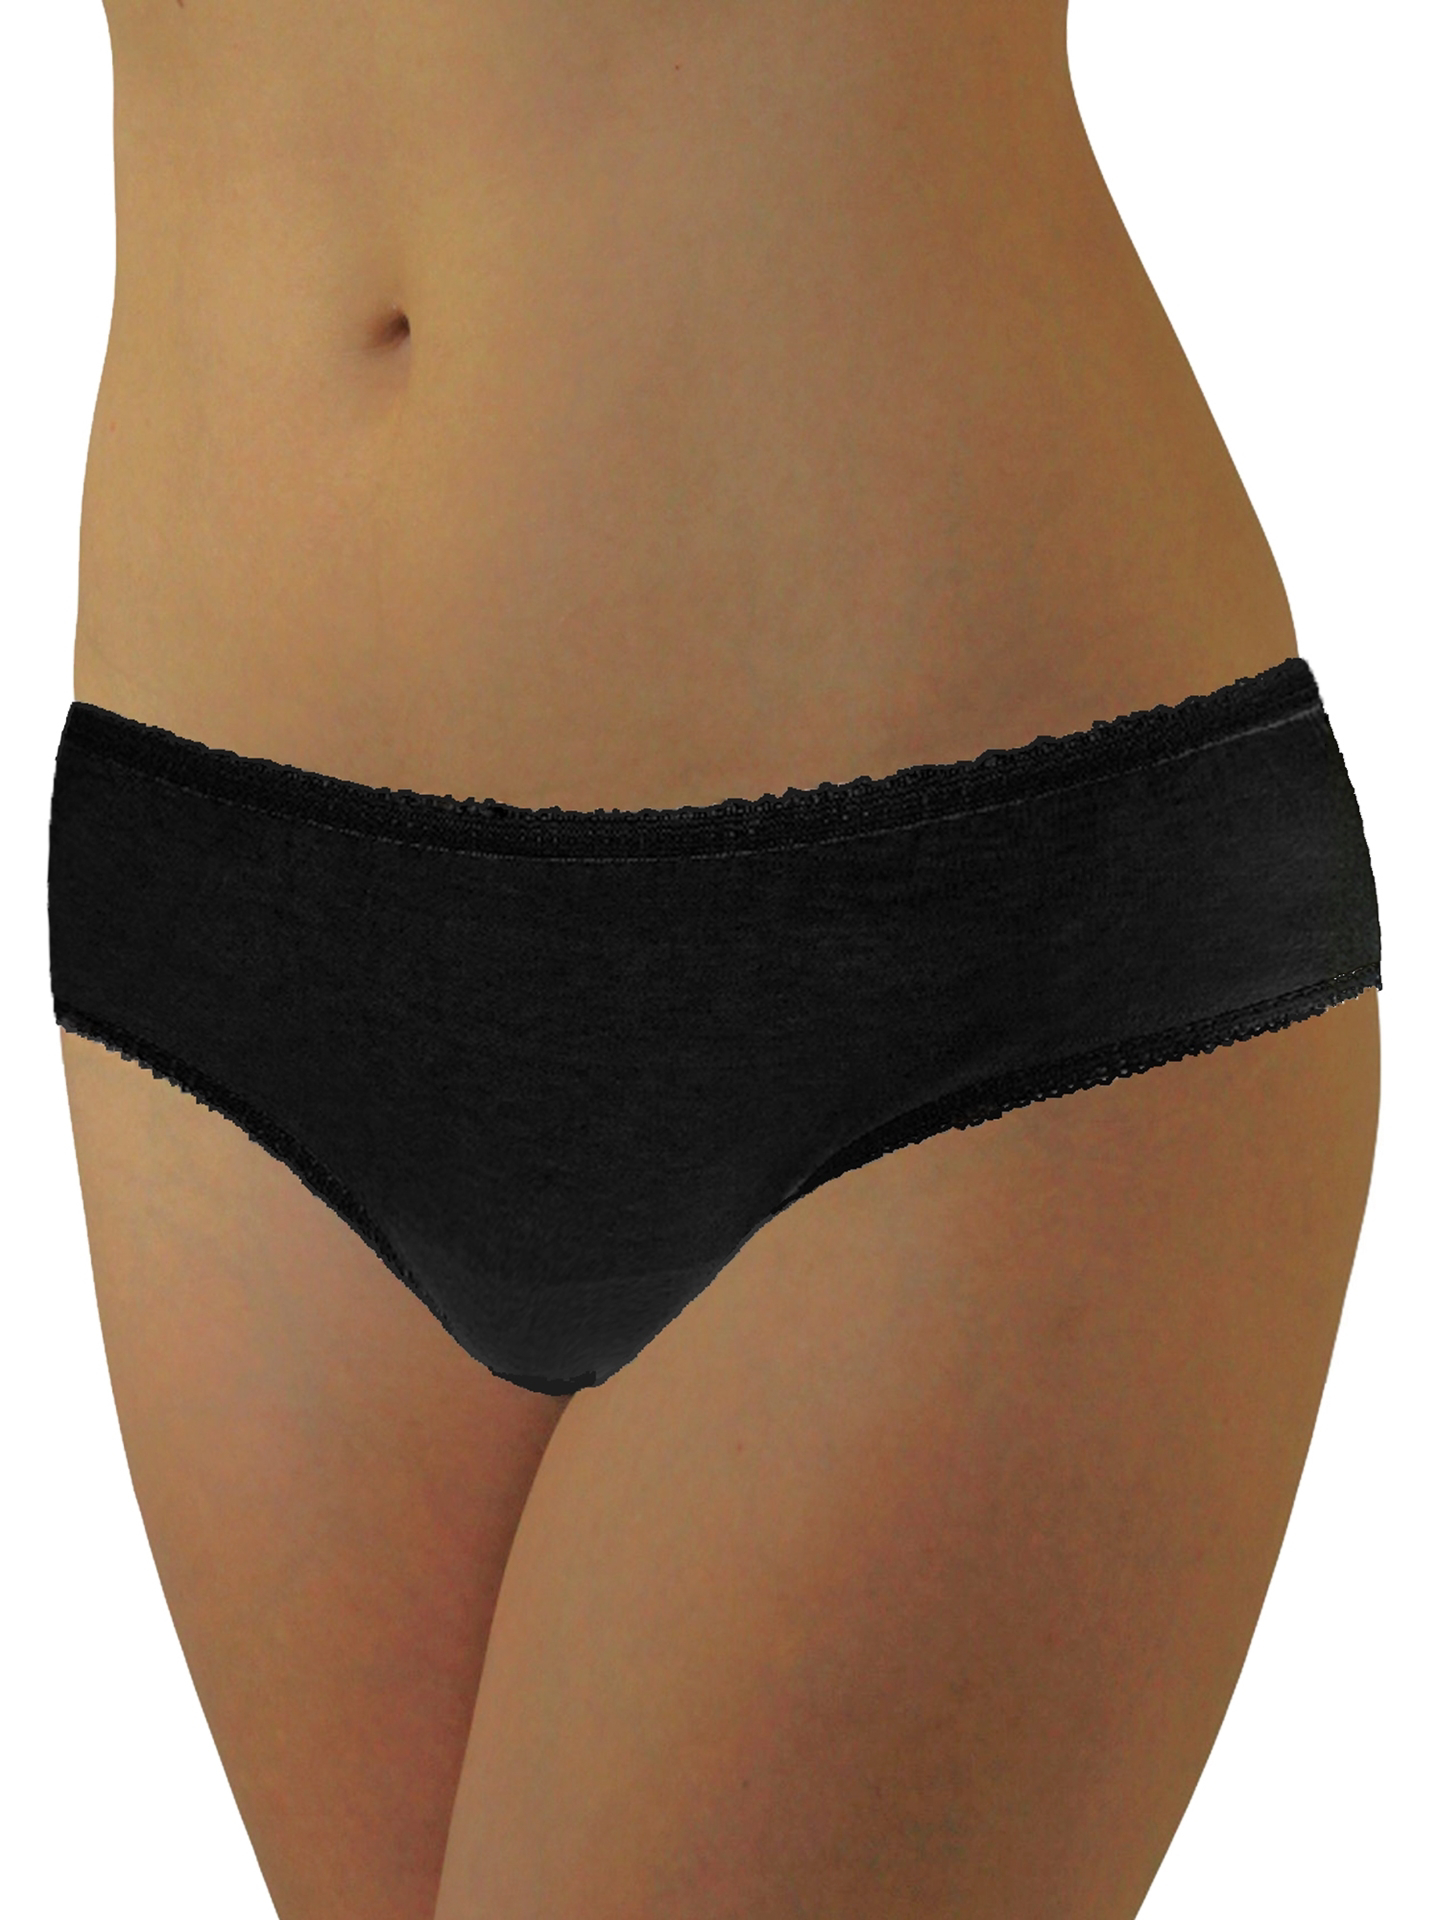 Women's Disposable Full-Cut Briefs Pkg. of 5 - and TravelSmith